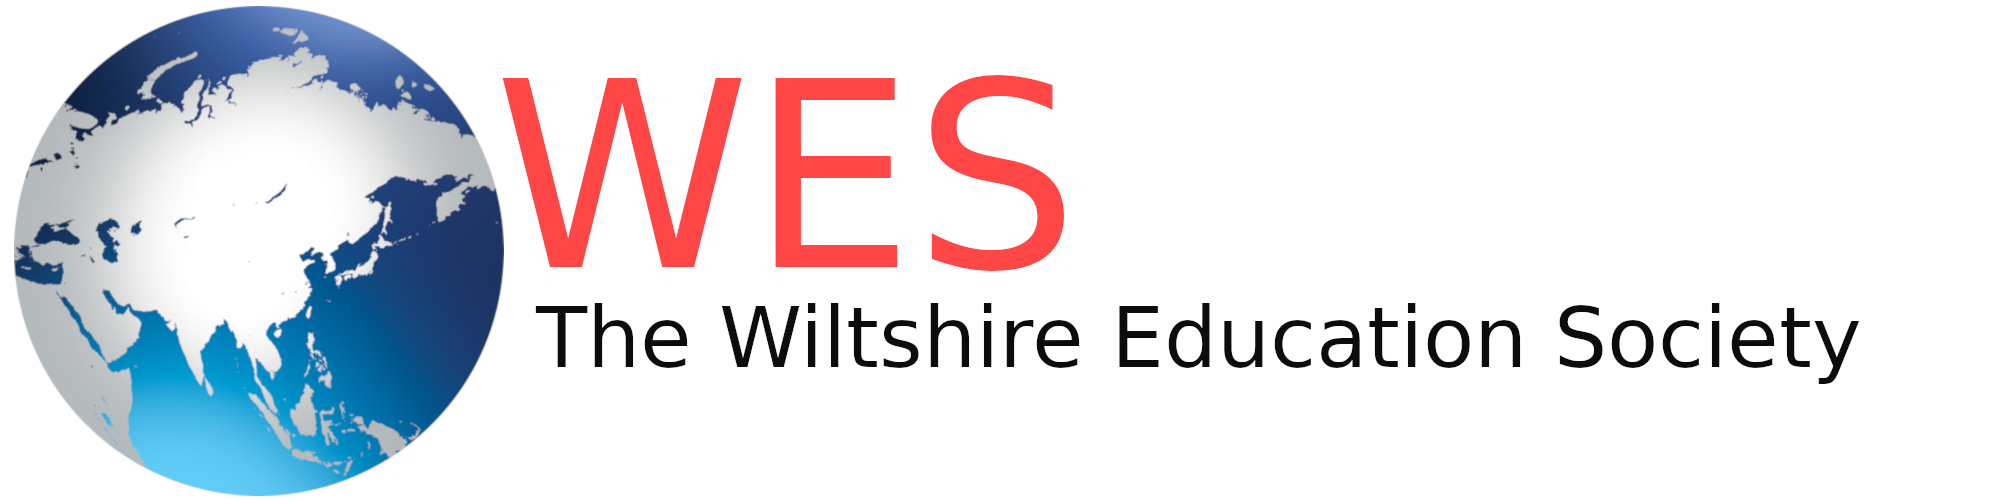 WES - Wiltshire Education Society